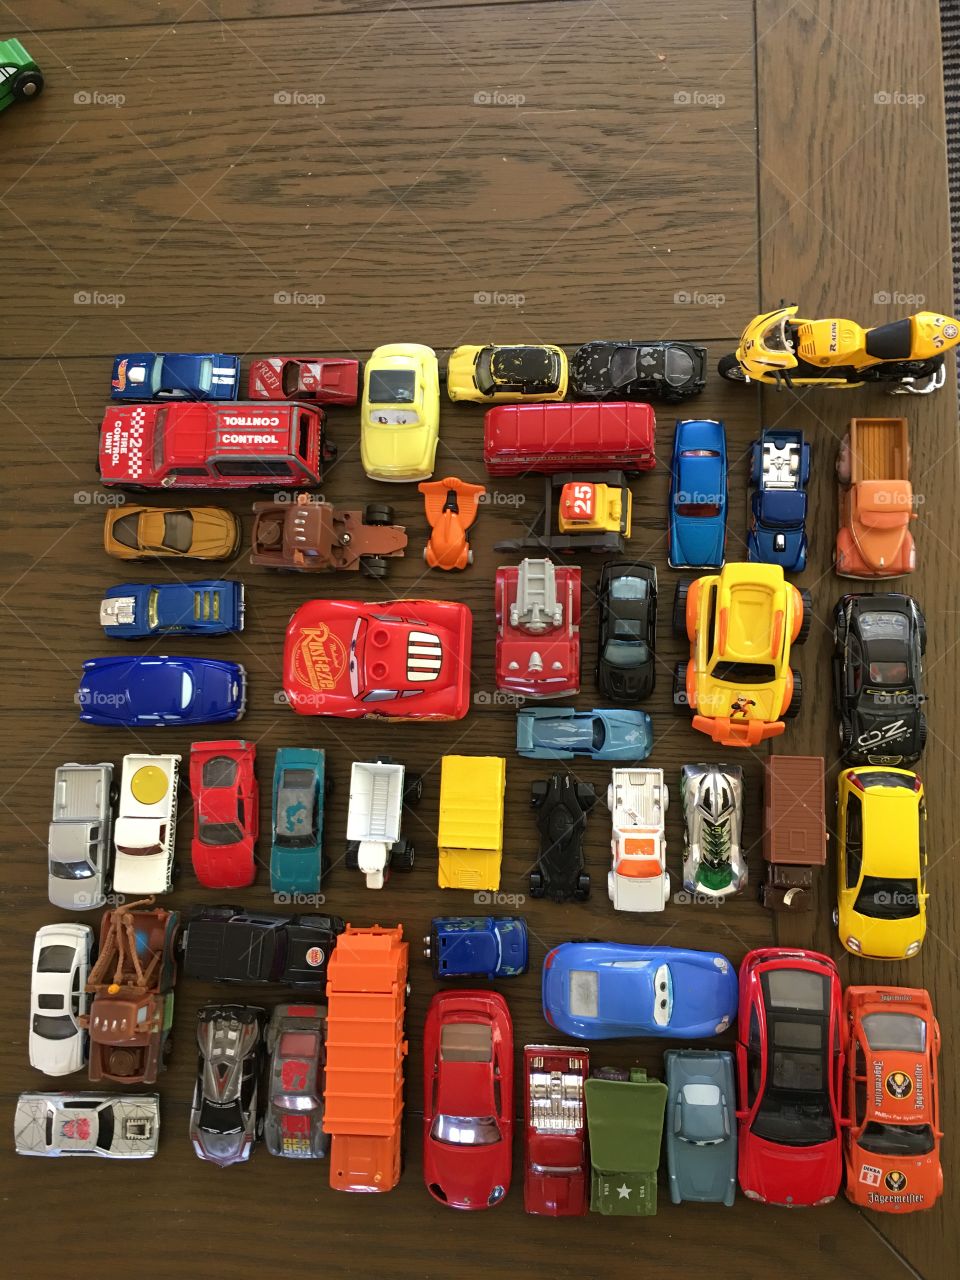 Toy cars arranged into a colorful array